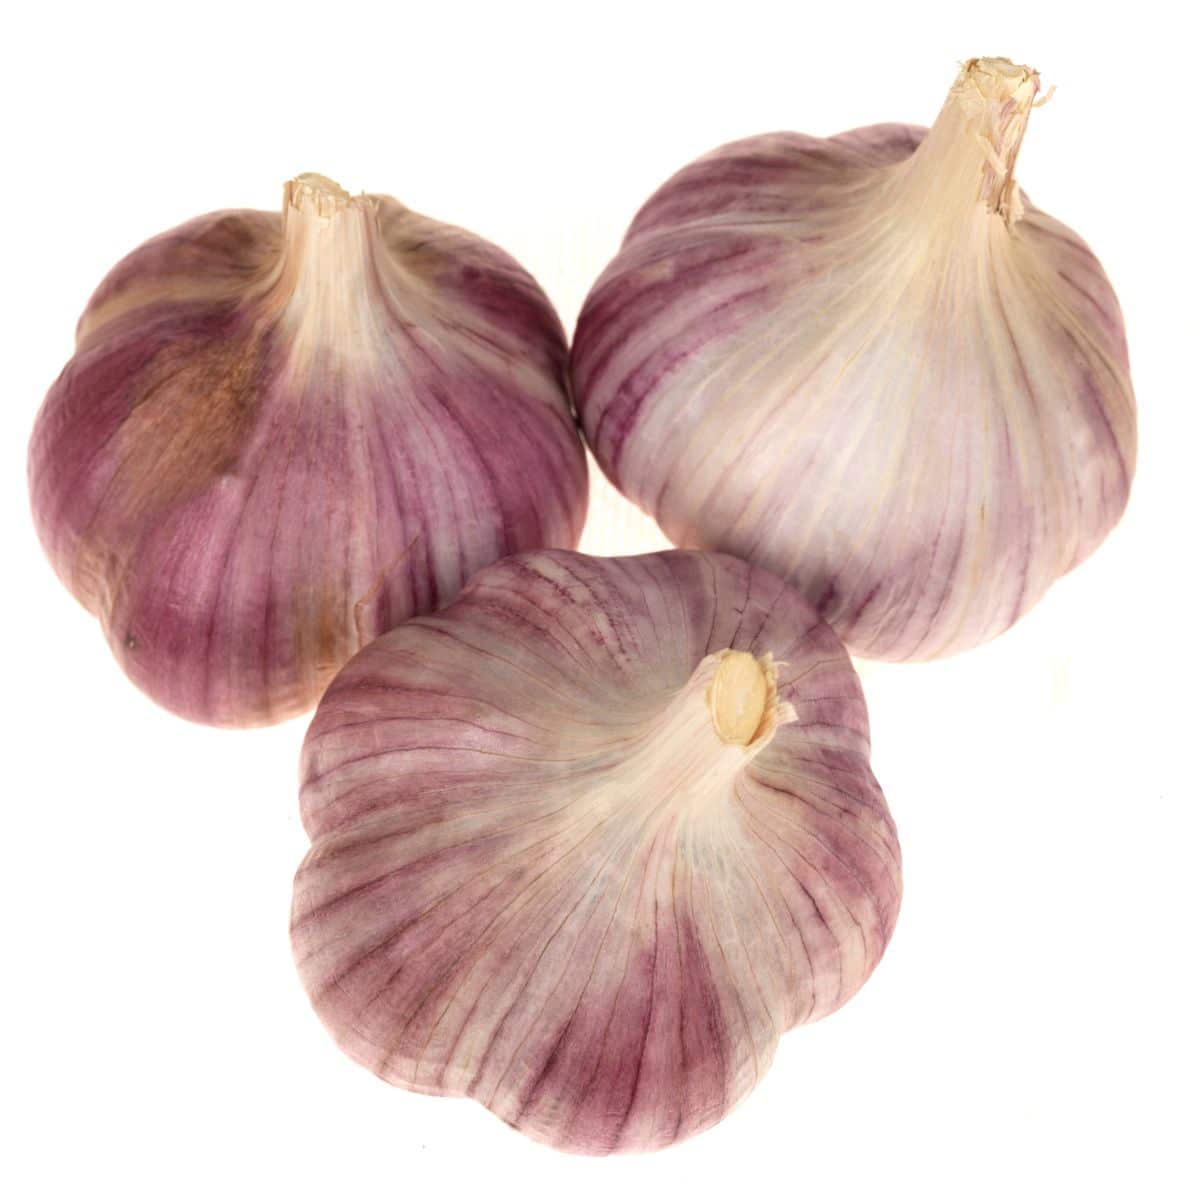 Silver rose garlic on an isolated white background.